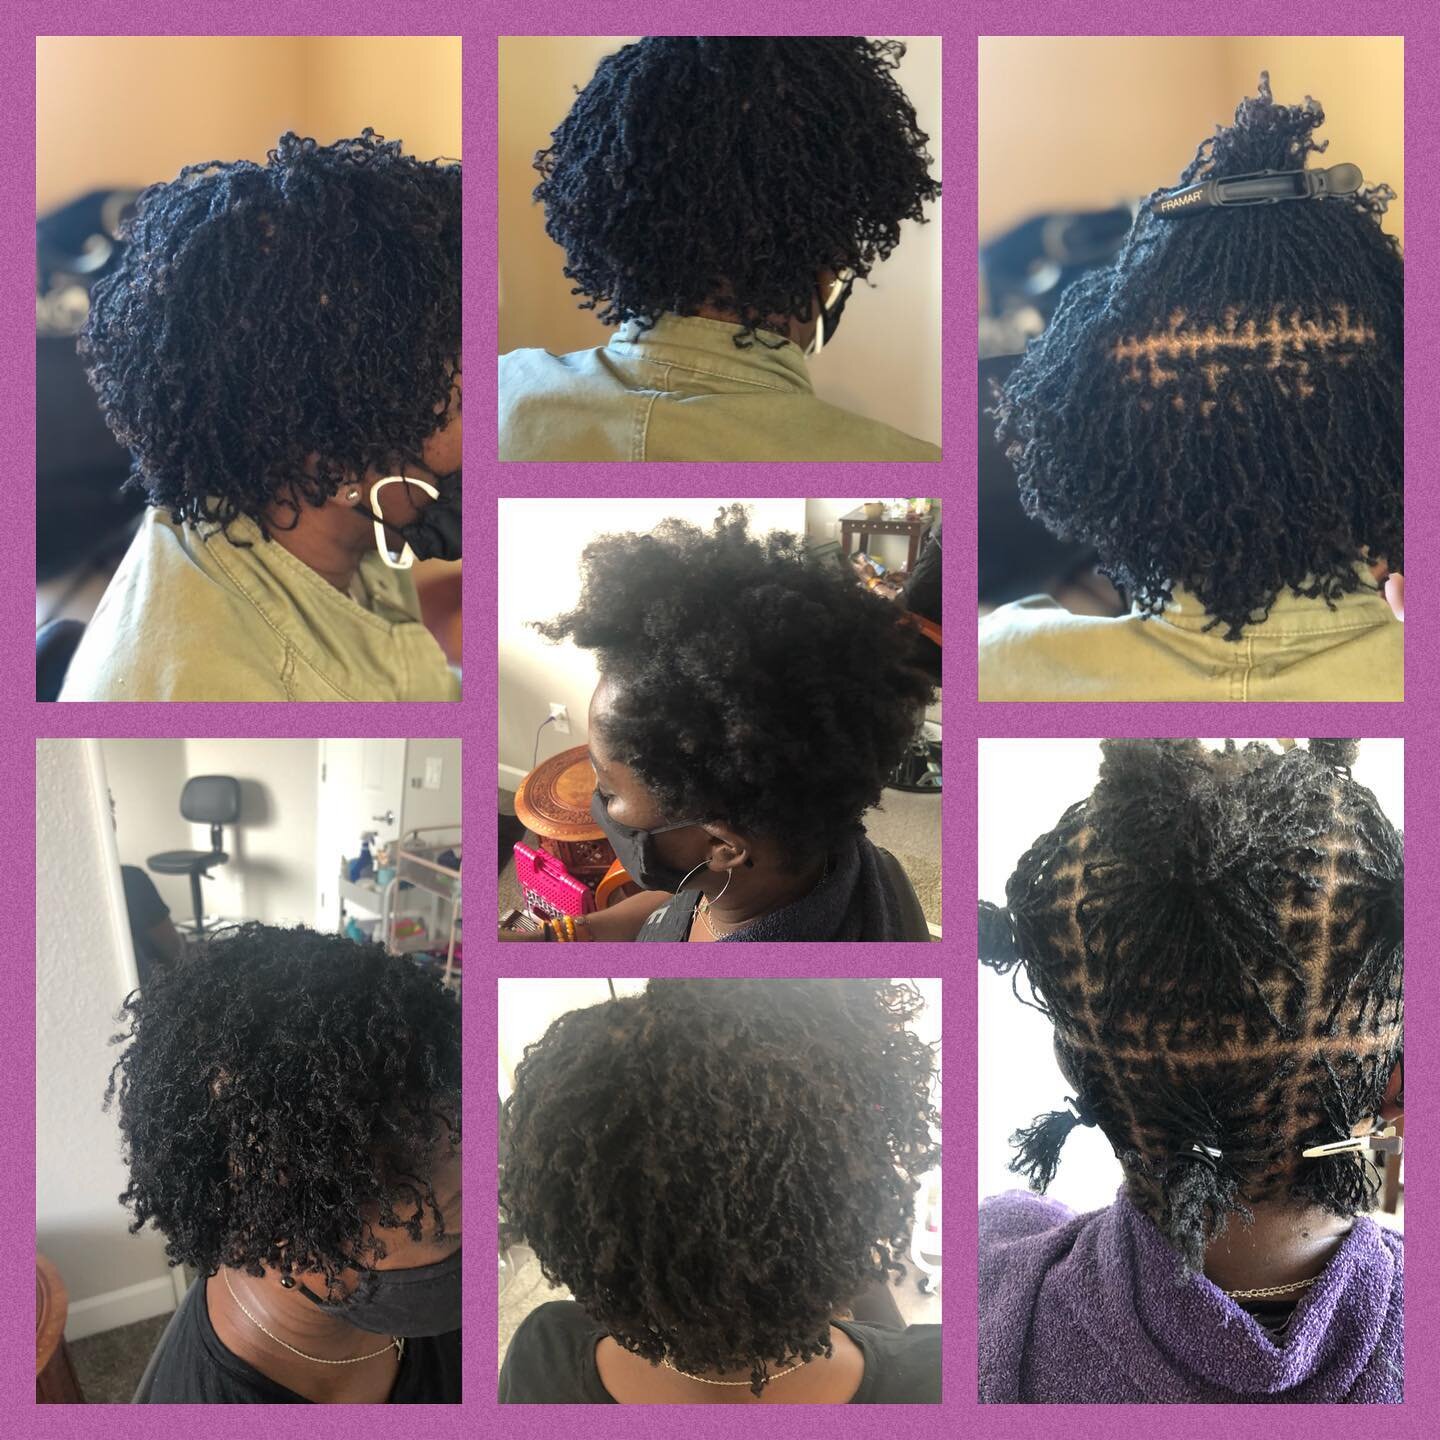 Install day at the bottom, 8months in at the top. The middle is about 2months in #sisterlocksinphoenix #arizonasisterlocks #sisterlocksaz #sisterlocksphx #sisterlocks #sisterlockcommunity #sisterlocksinarizona